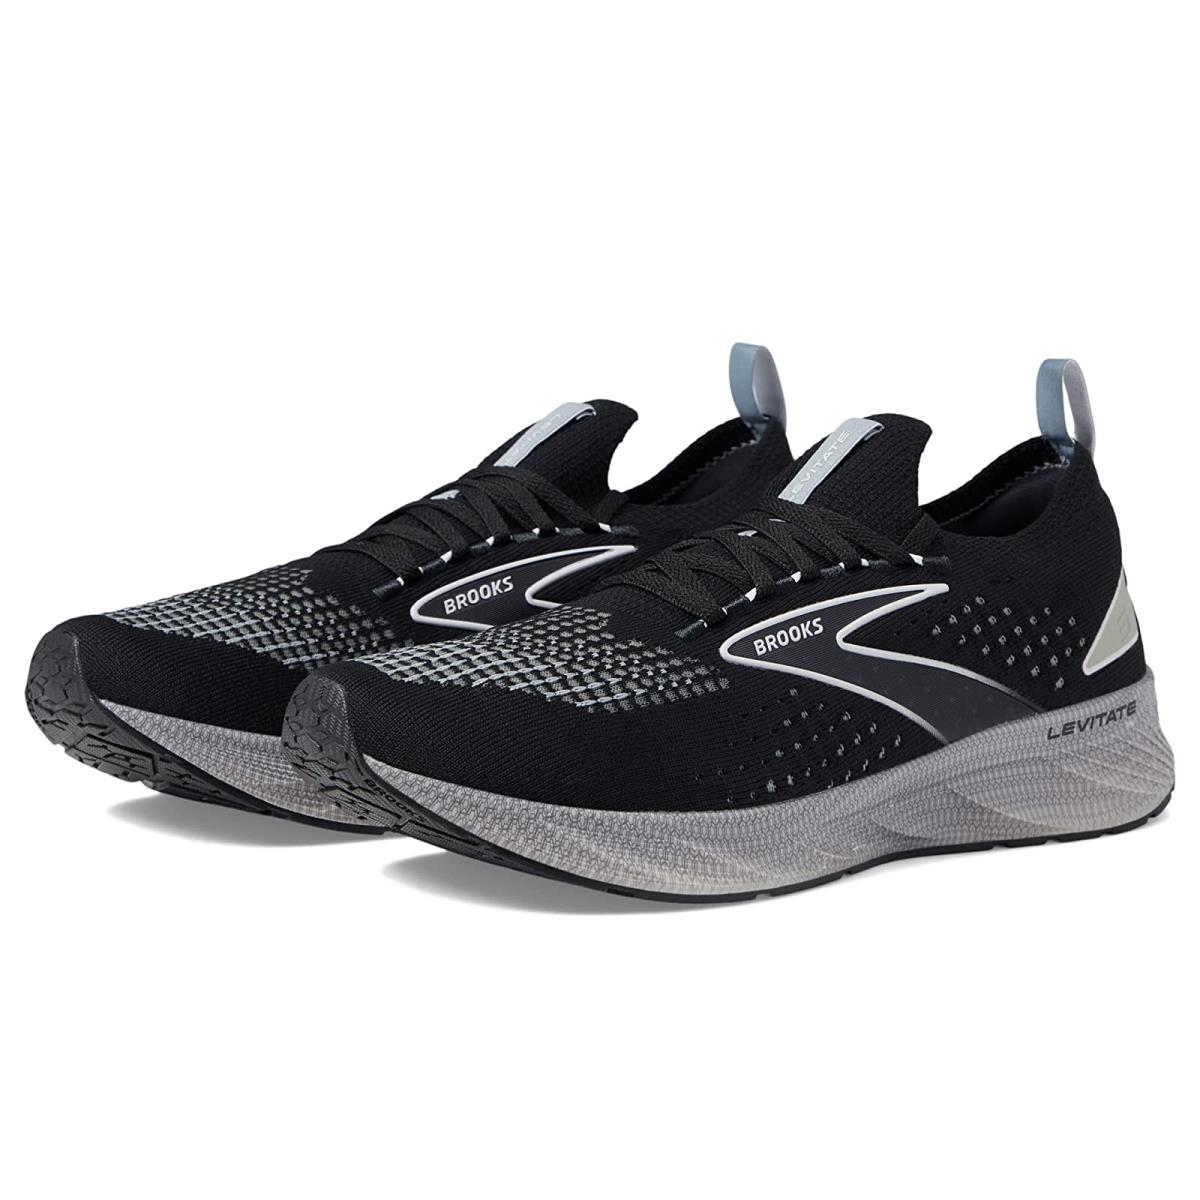 Man`s Sneakers Athletic Shoes Brooks Levitate Stealthfit 6 Black/Grey/Oyster